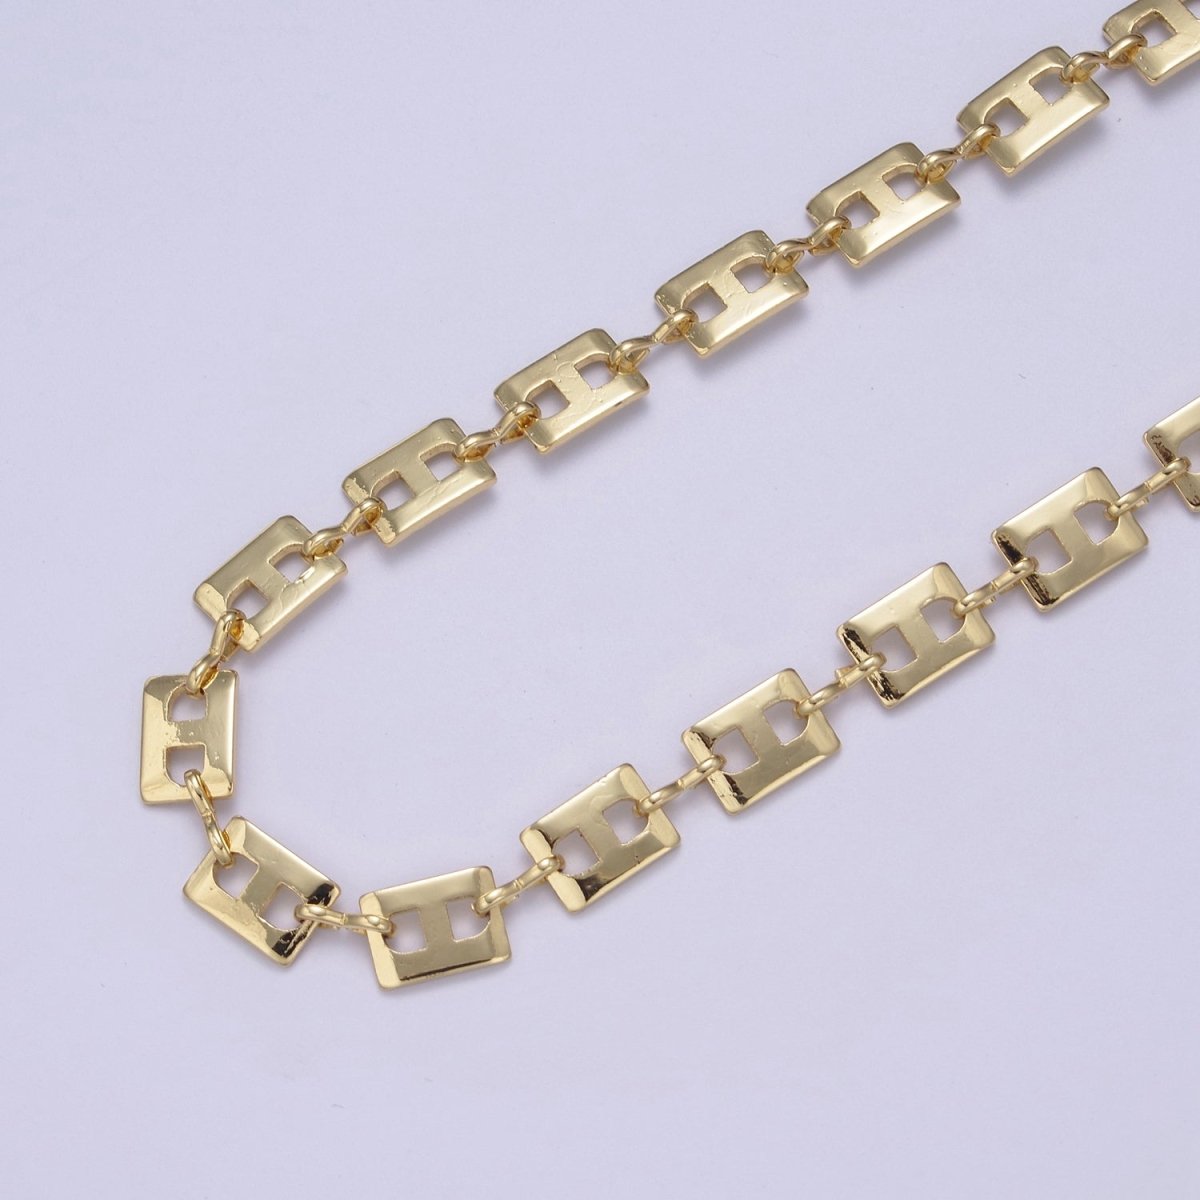 24K Gold Filled Rectangular Designed Chain, Rectangle 10X7mm Anchor Chain with 3mm Figure Eight 8 Link, Unfinished Chain For Jewelry Making | ROLL-650 Clearance Pricing - DLUXCA